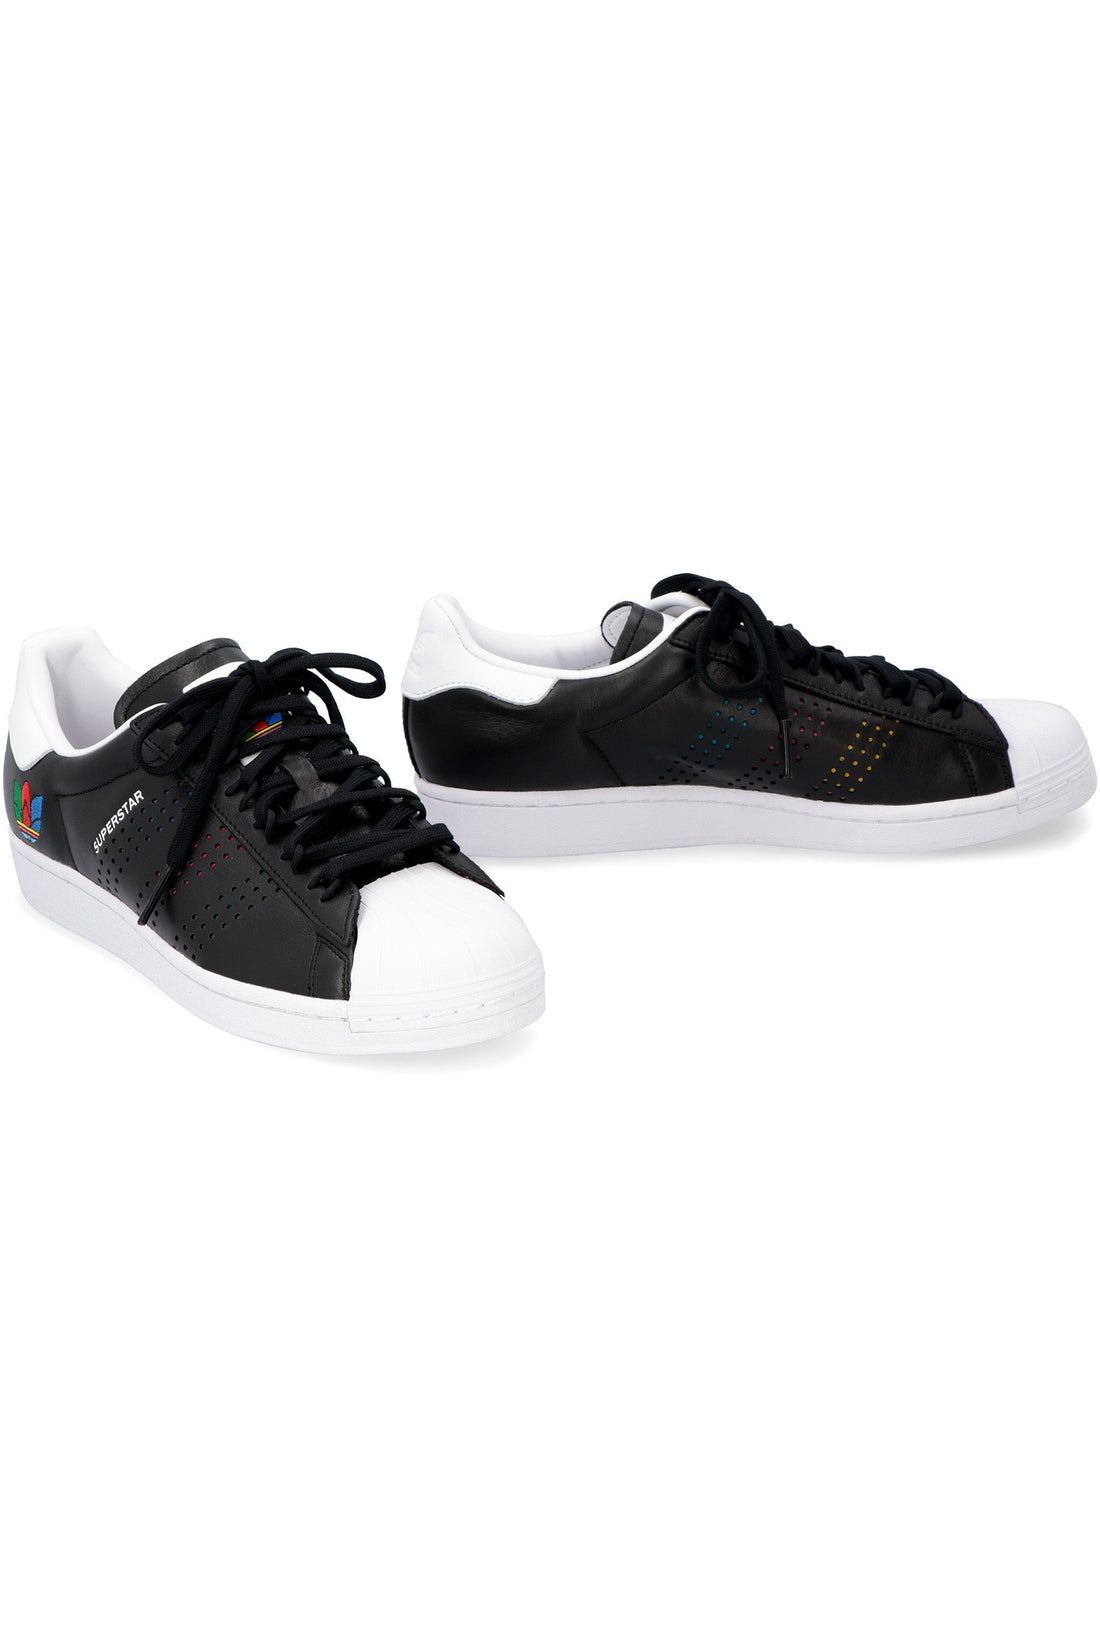 adidas-OUTLET-SALE-Superstar low-top sneakers-ARCHIVIST